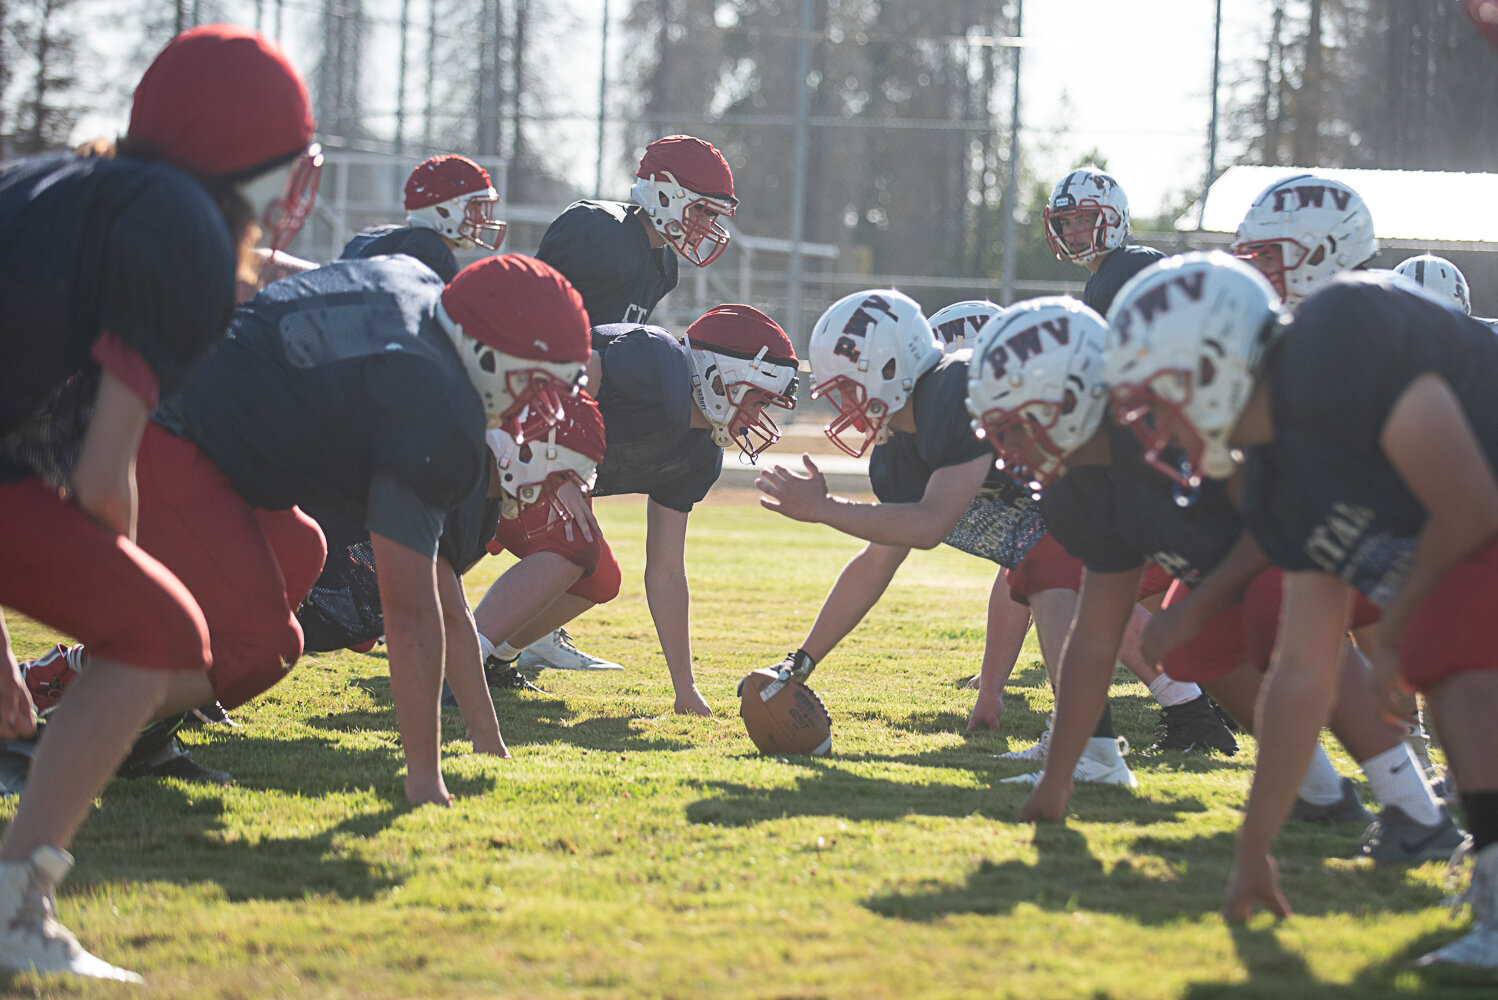 The offense and defense line up before a play during an 11-on-11 session of PWV's practice on Aug. 19, only differentiated by the red helmet caps worn by the defense.